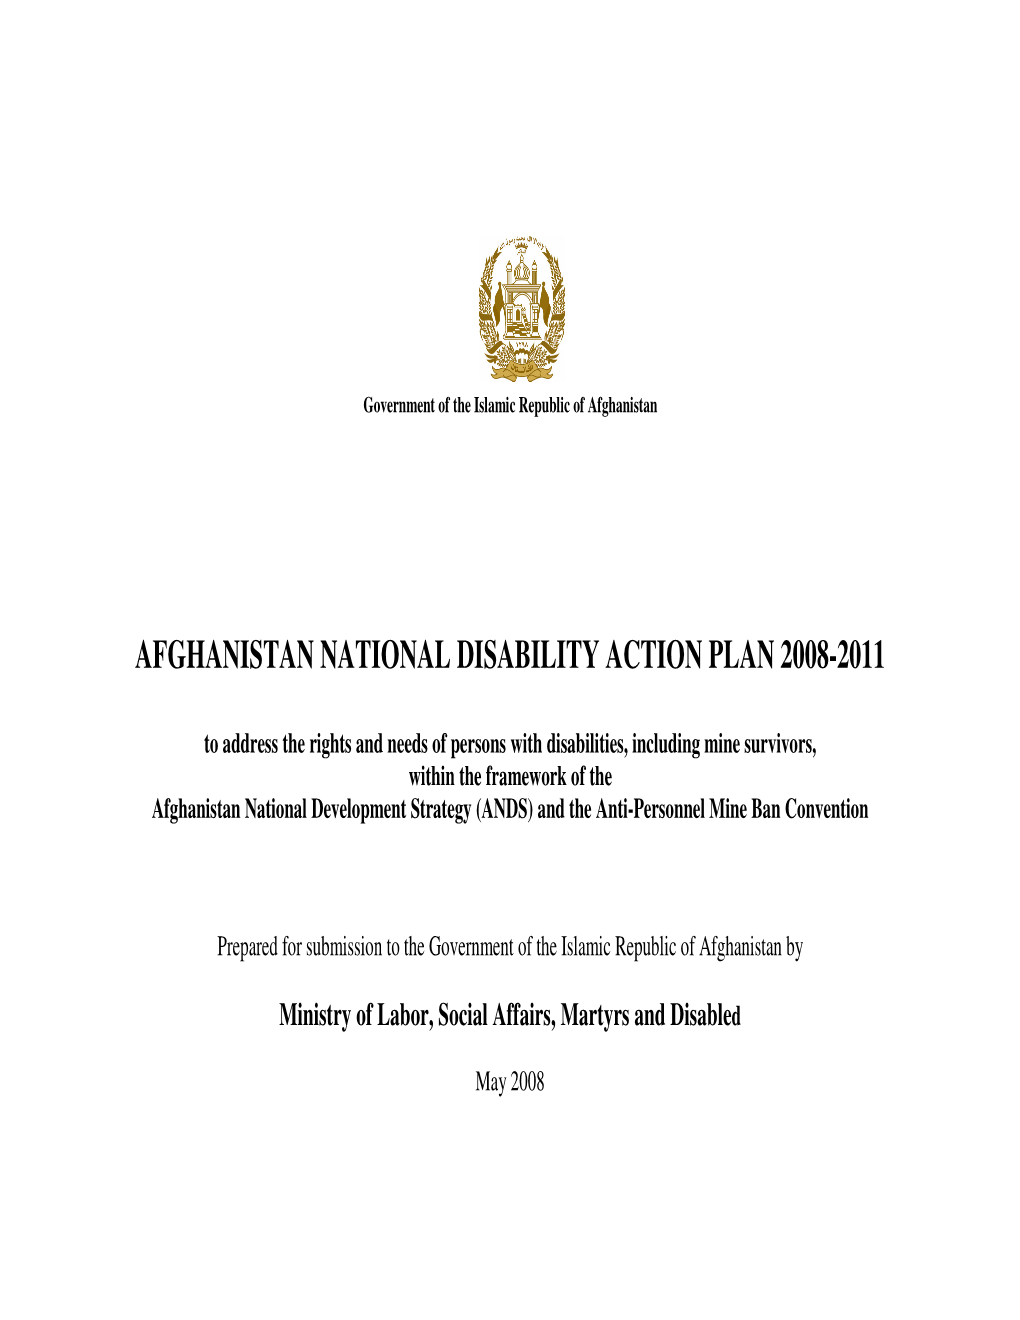 Afghanistan National Disability Action Plan 2008-2011